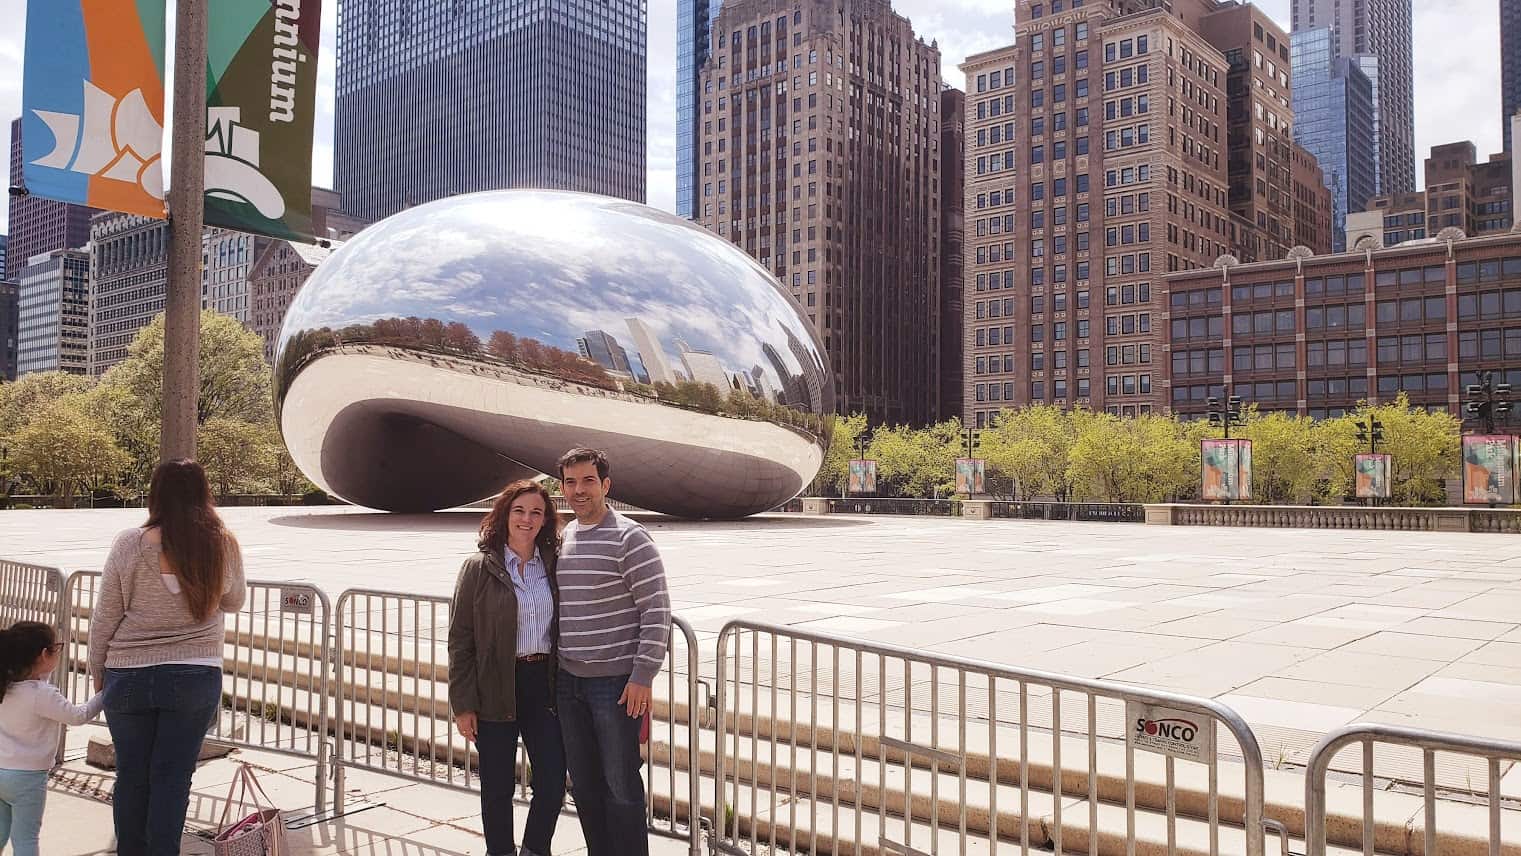 Darcee and Eric Gamble Standing outside the Cloud Gate Bean when they went to visit Chicago in Spring